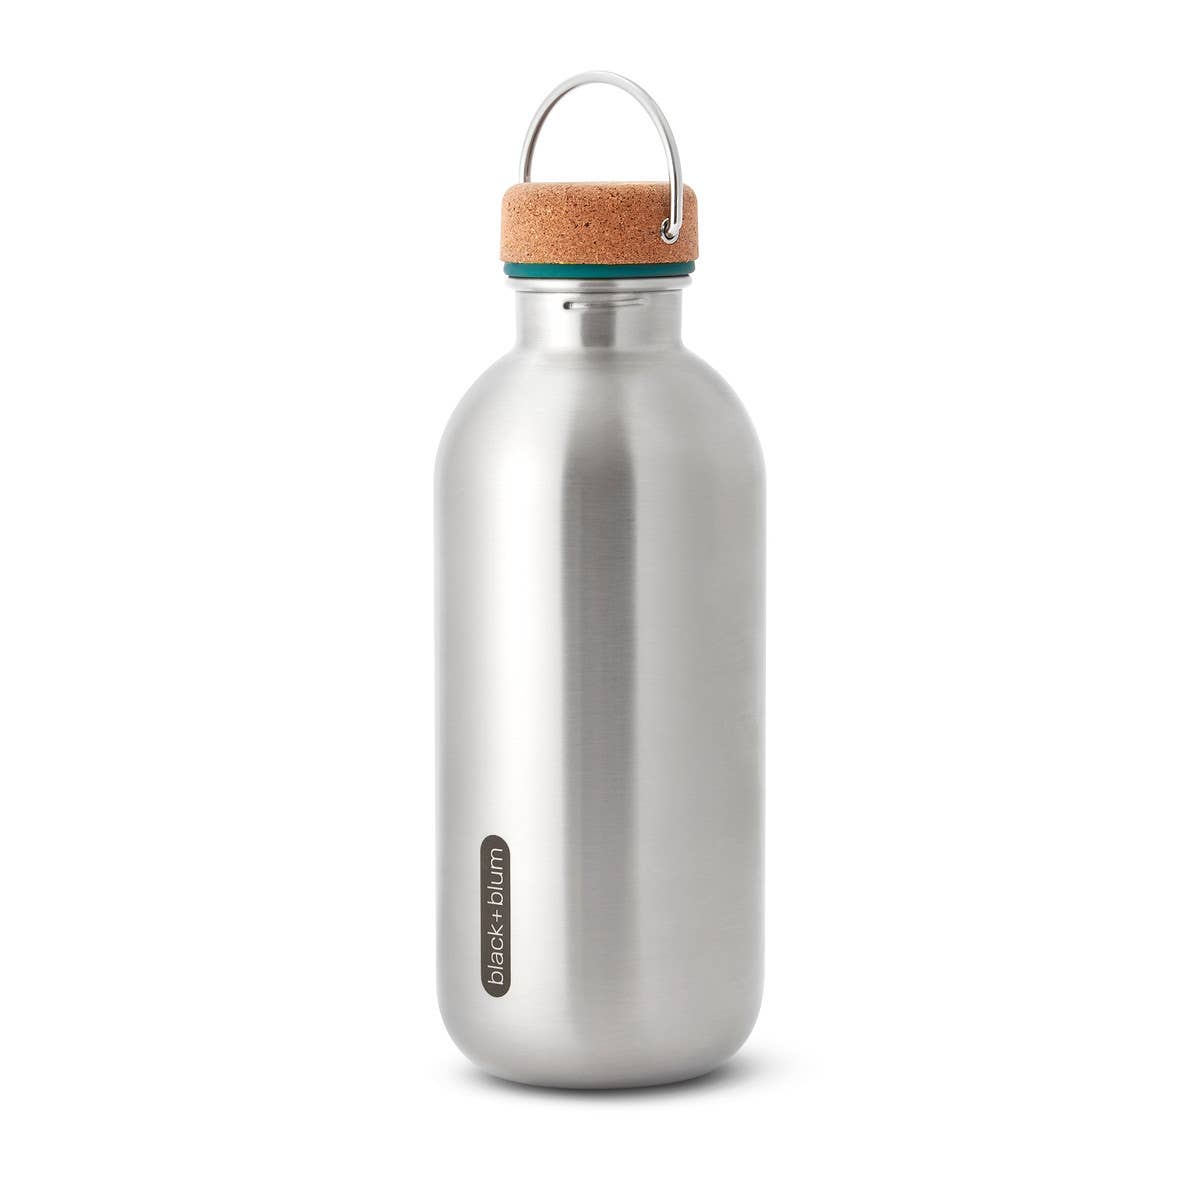 Patterned Stainless Steel Water Bottle – Alloy Gym